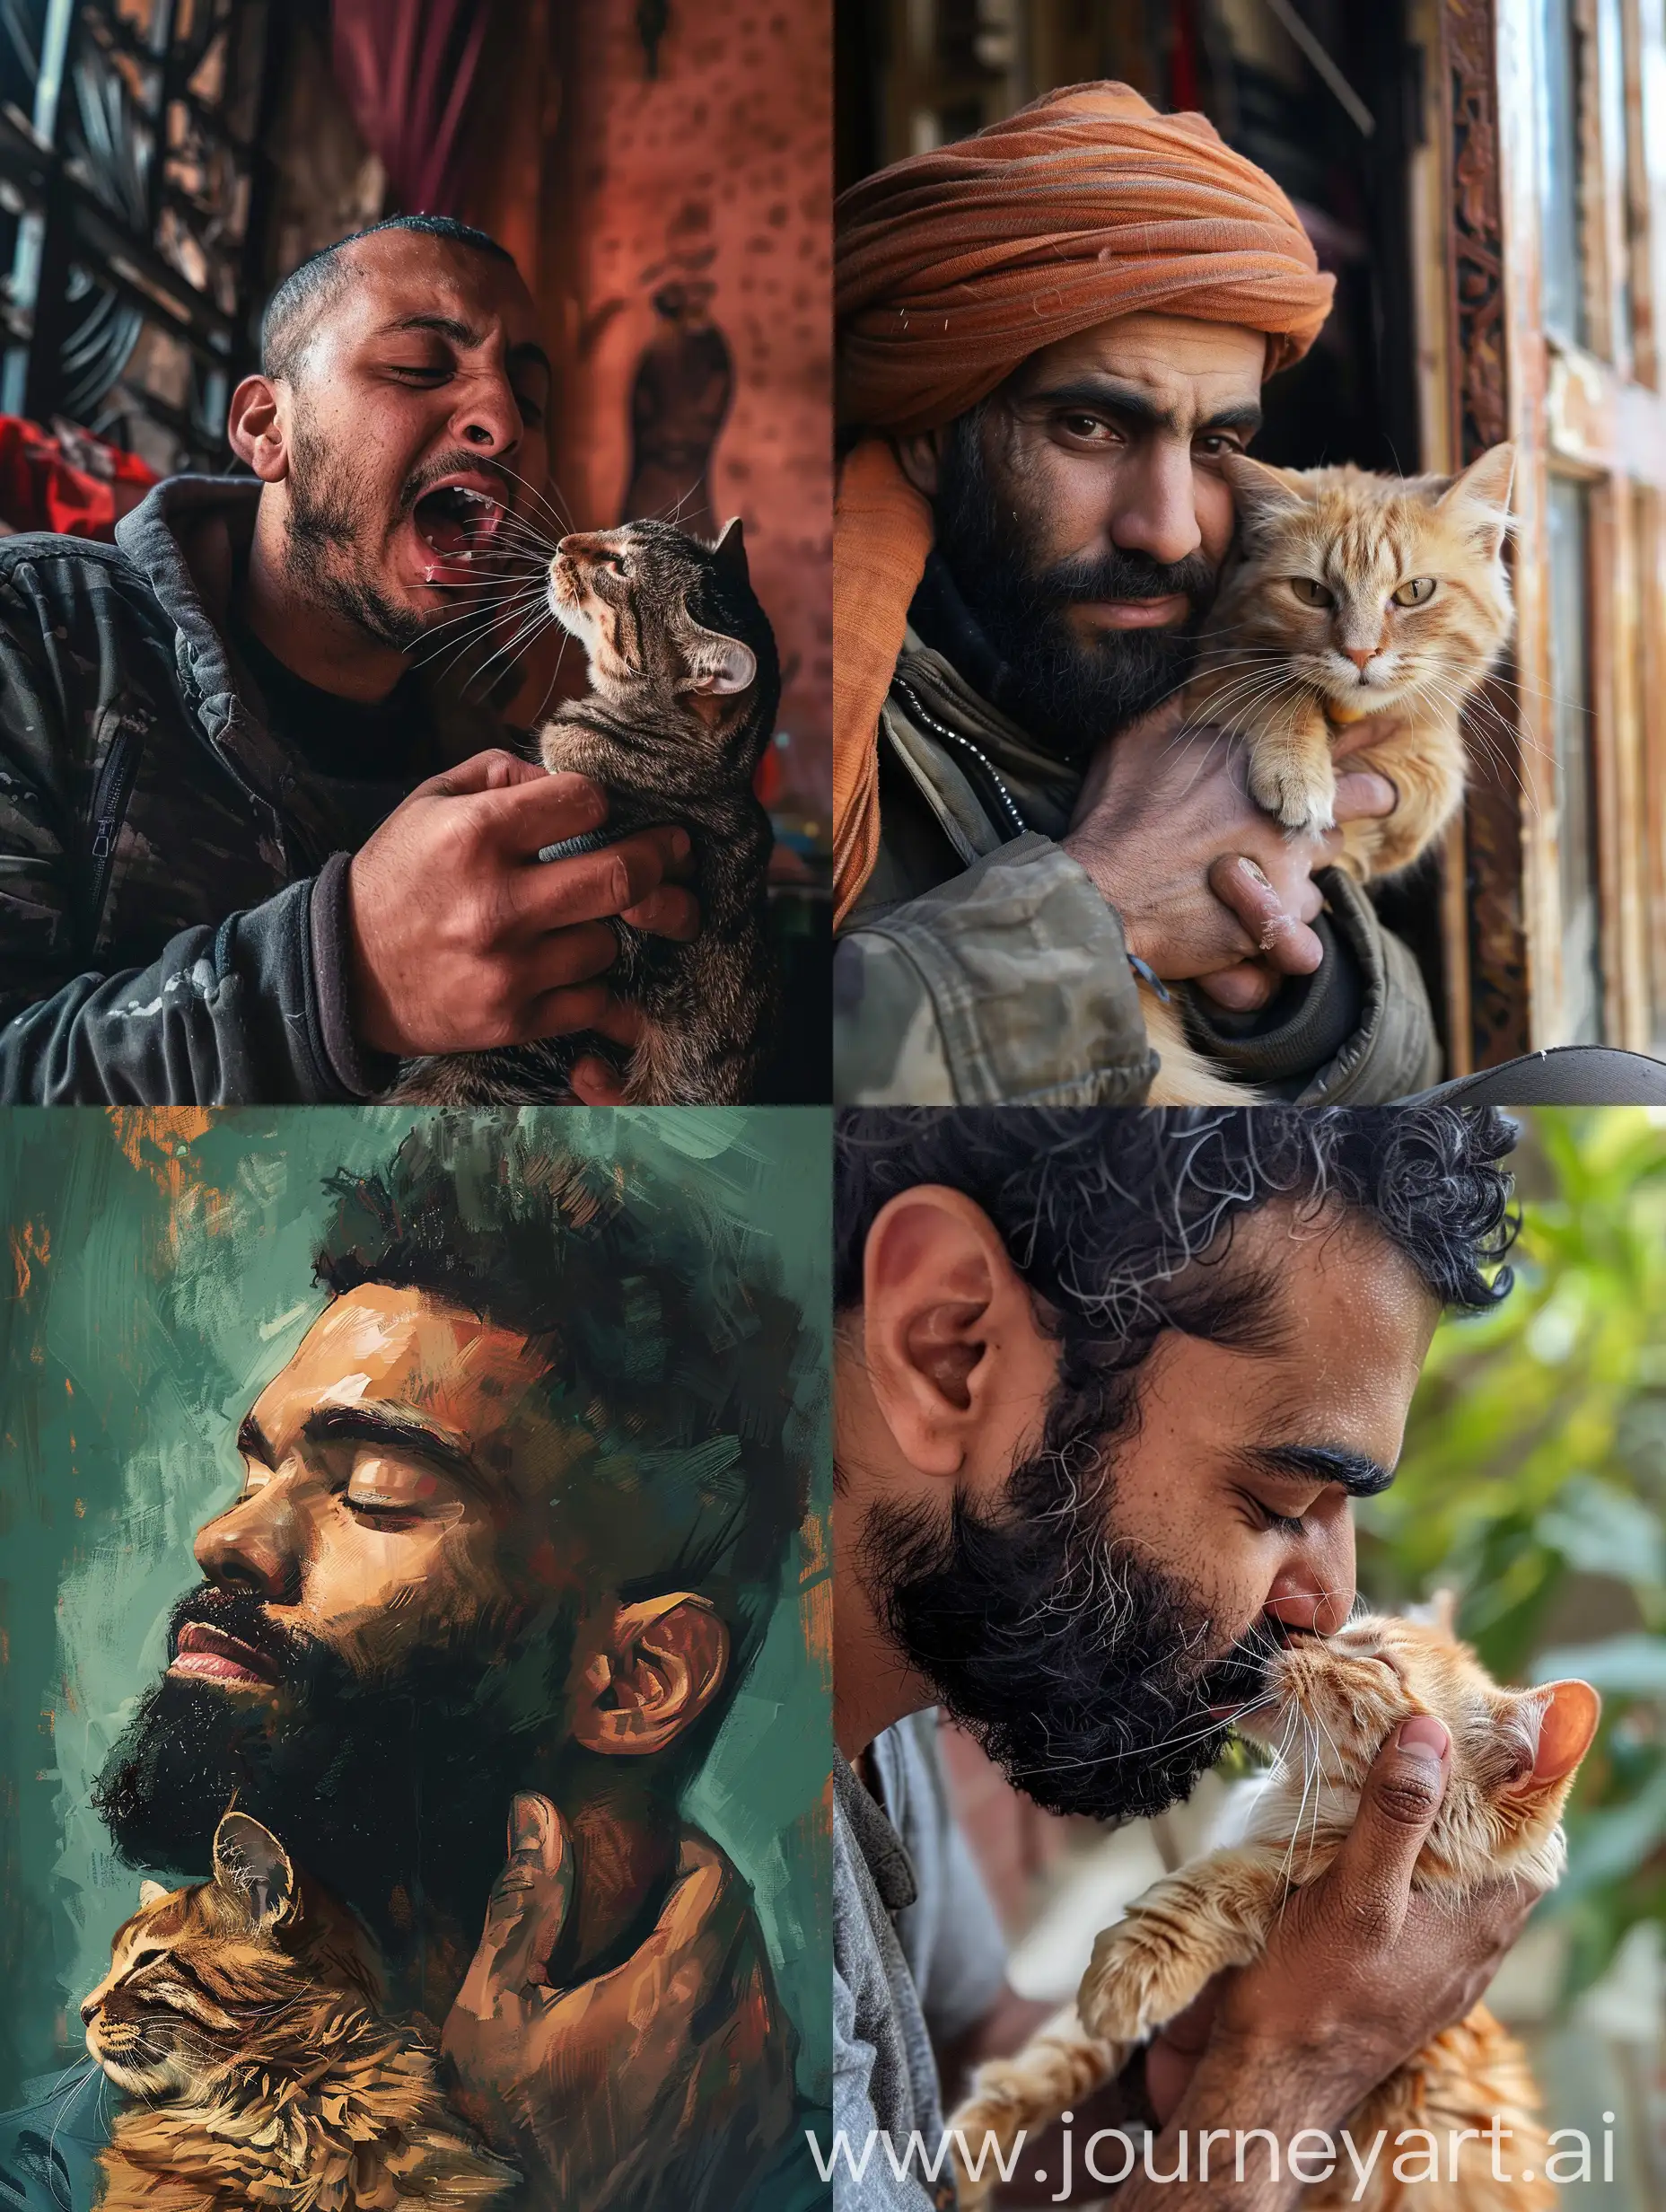 Saeed-Enjoying-a-CatThemed-Meal-with-Vibrant-Colors